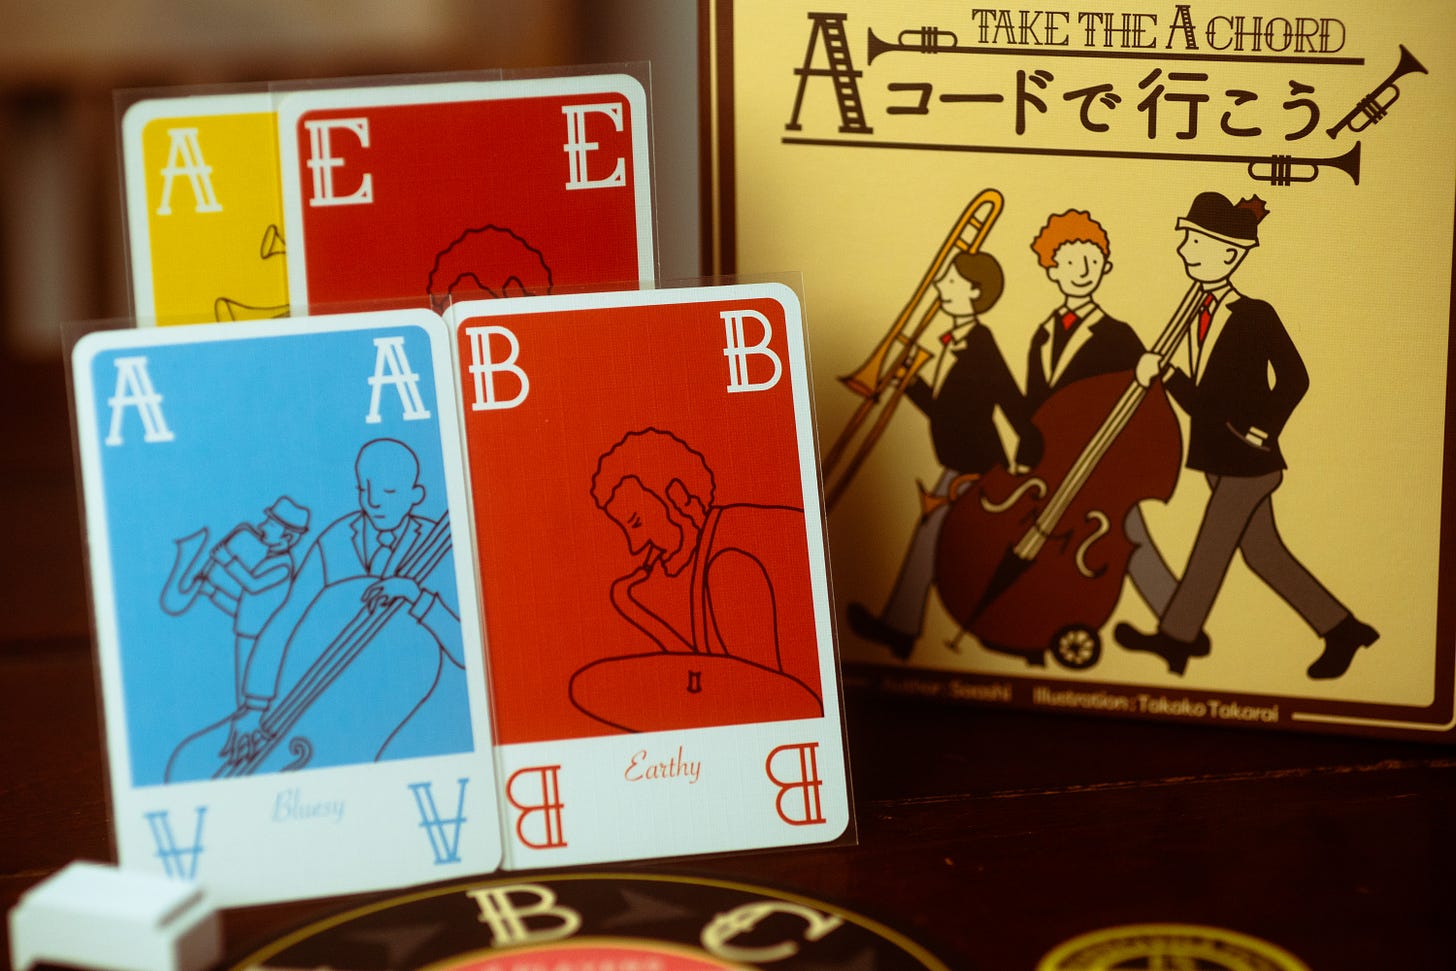 The card game Take the A Chord on display on a table. Several cards are visible of various suits.